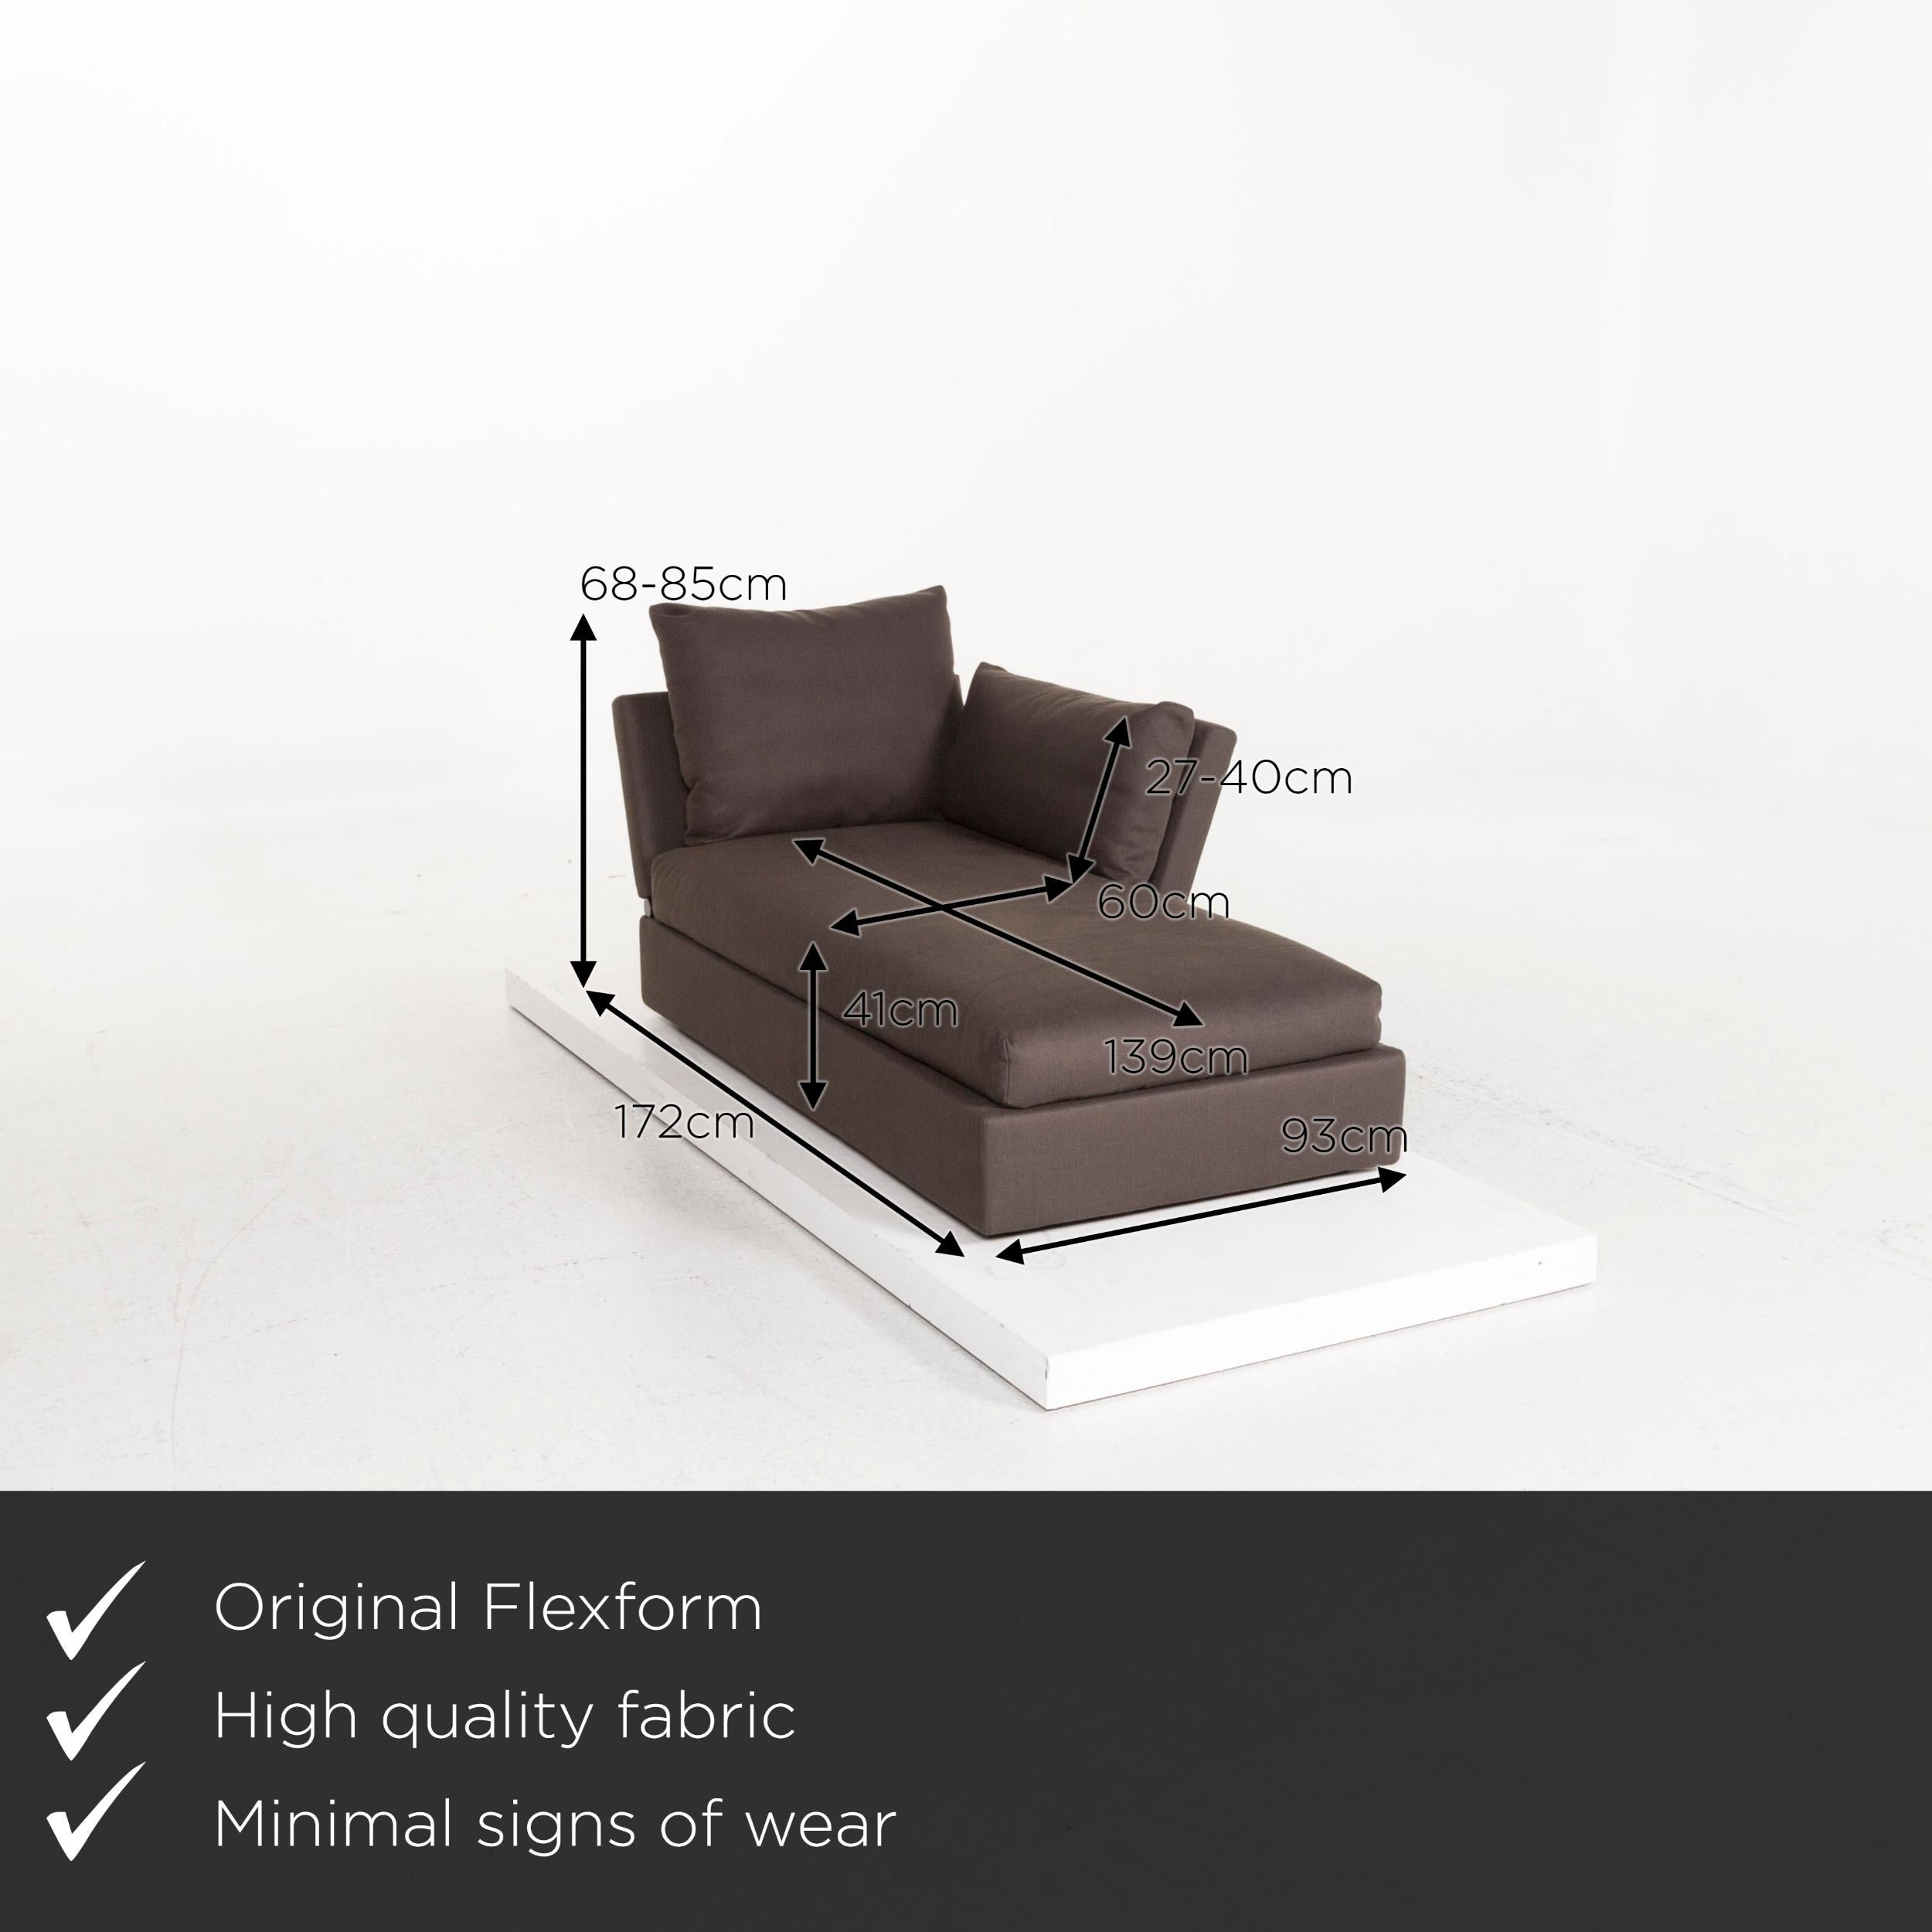 We present to you a Flexform fabric sofa brown dark brown two-seat sleep function function couch.
   
 

 Product measurements in centimeters:
 

Depth 93
Width 172
Height 85
Seat height 41
Rest height 68
Seat depth 60
Seat width